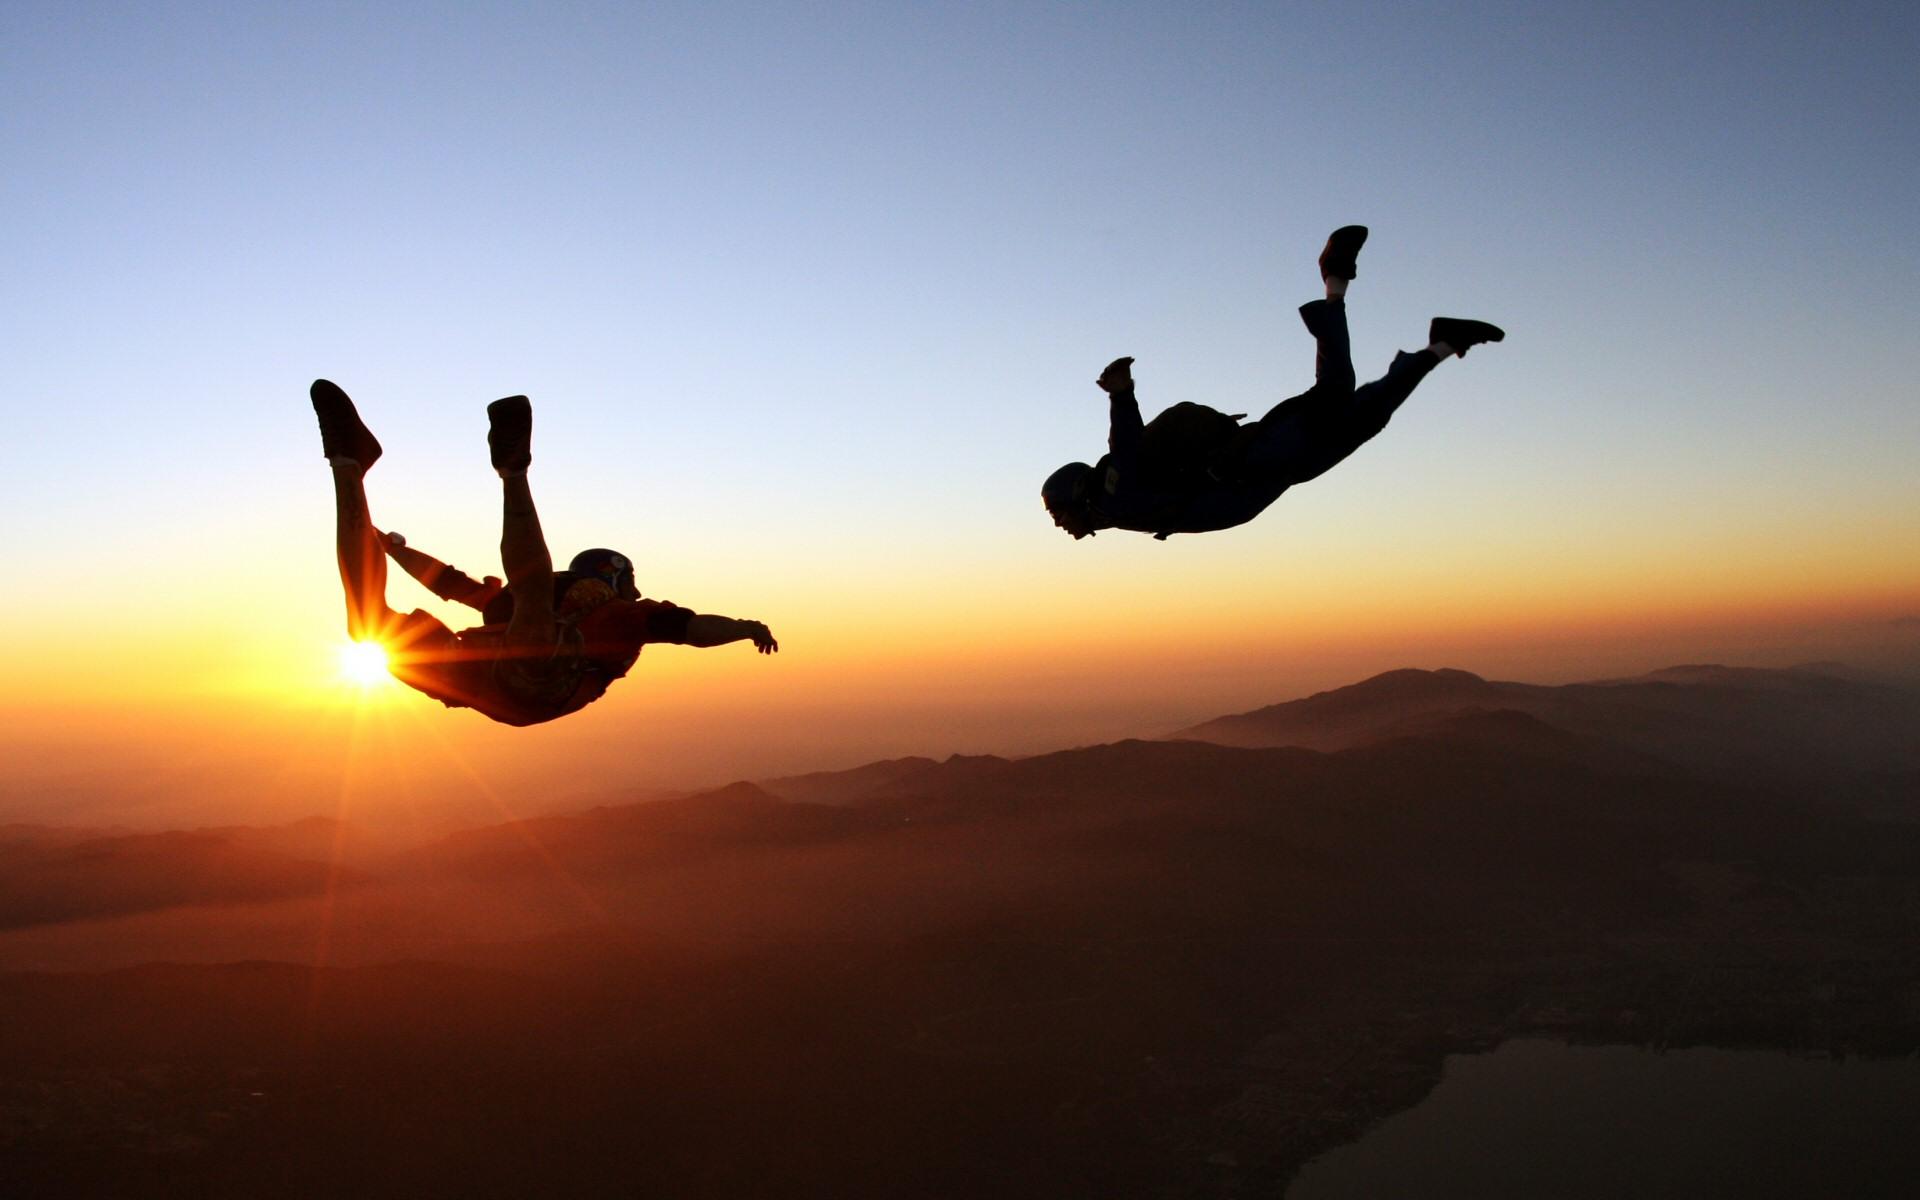 Awesome Picture. Skydiving Full HD Quality Wallpaper